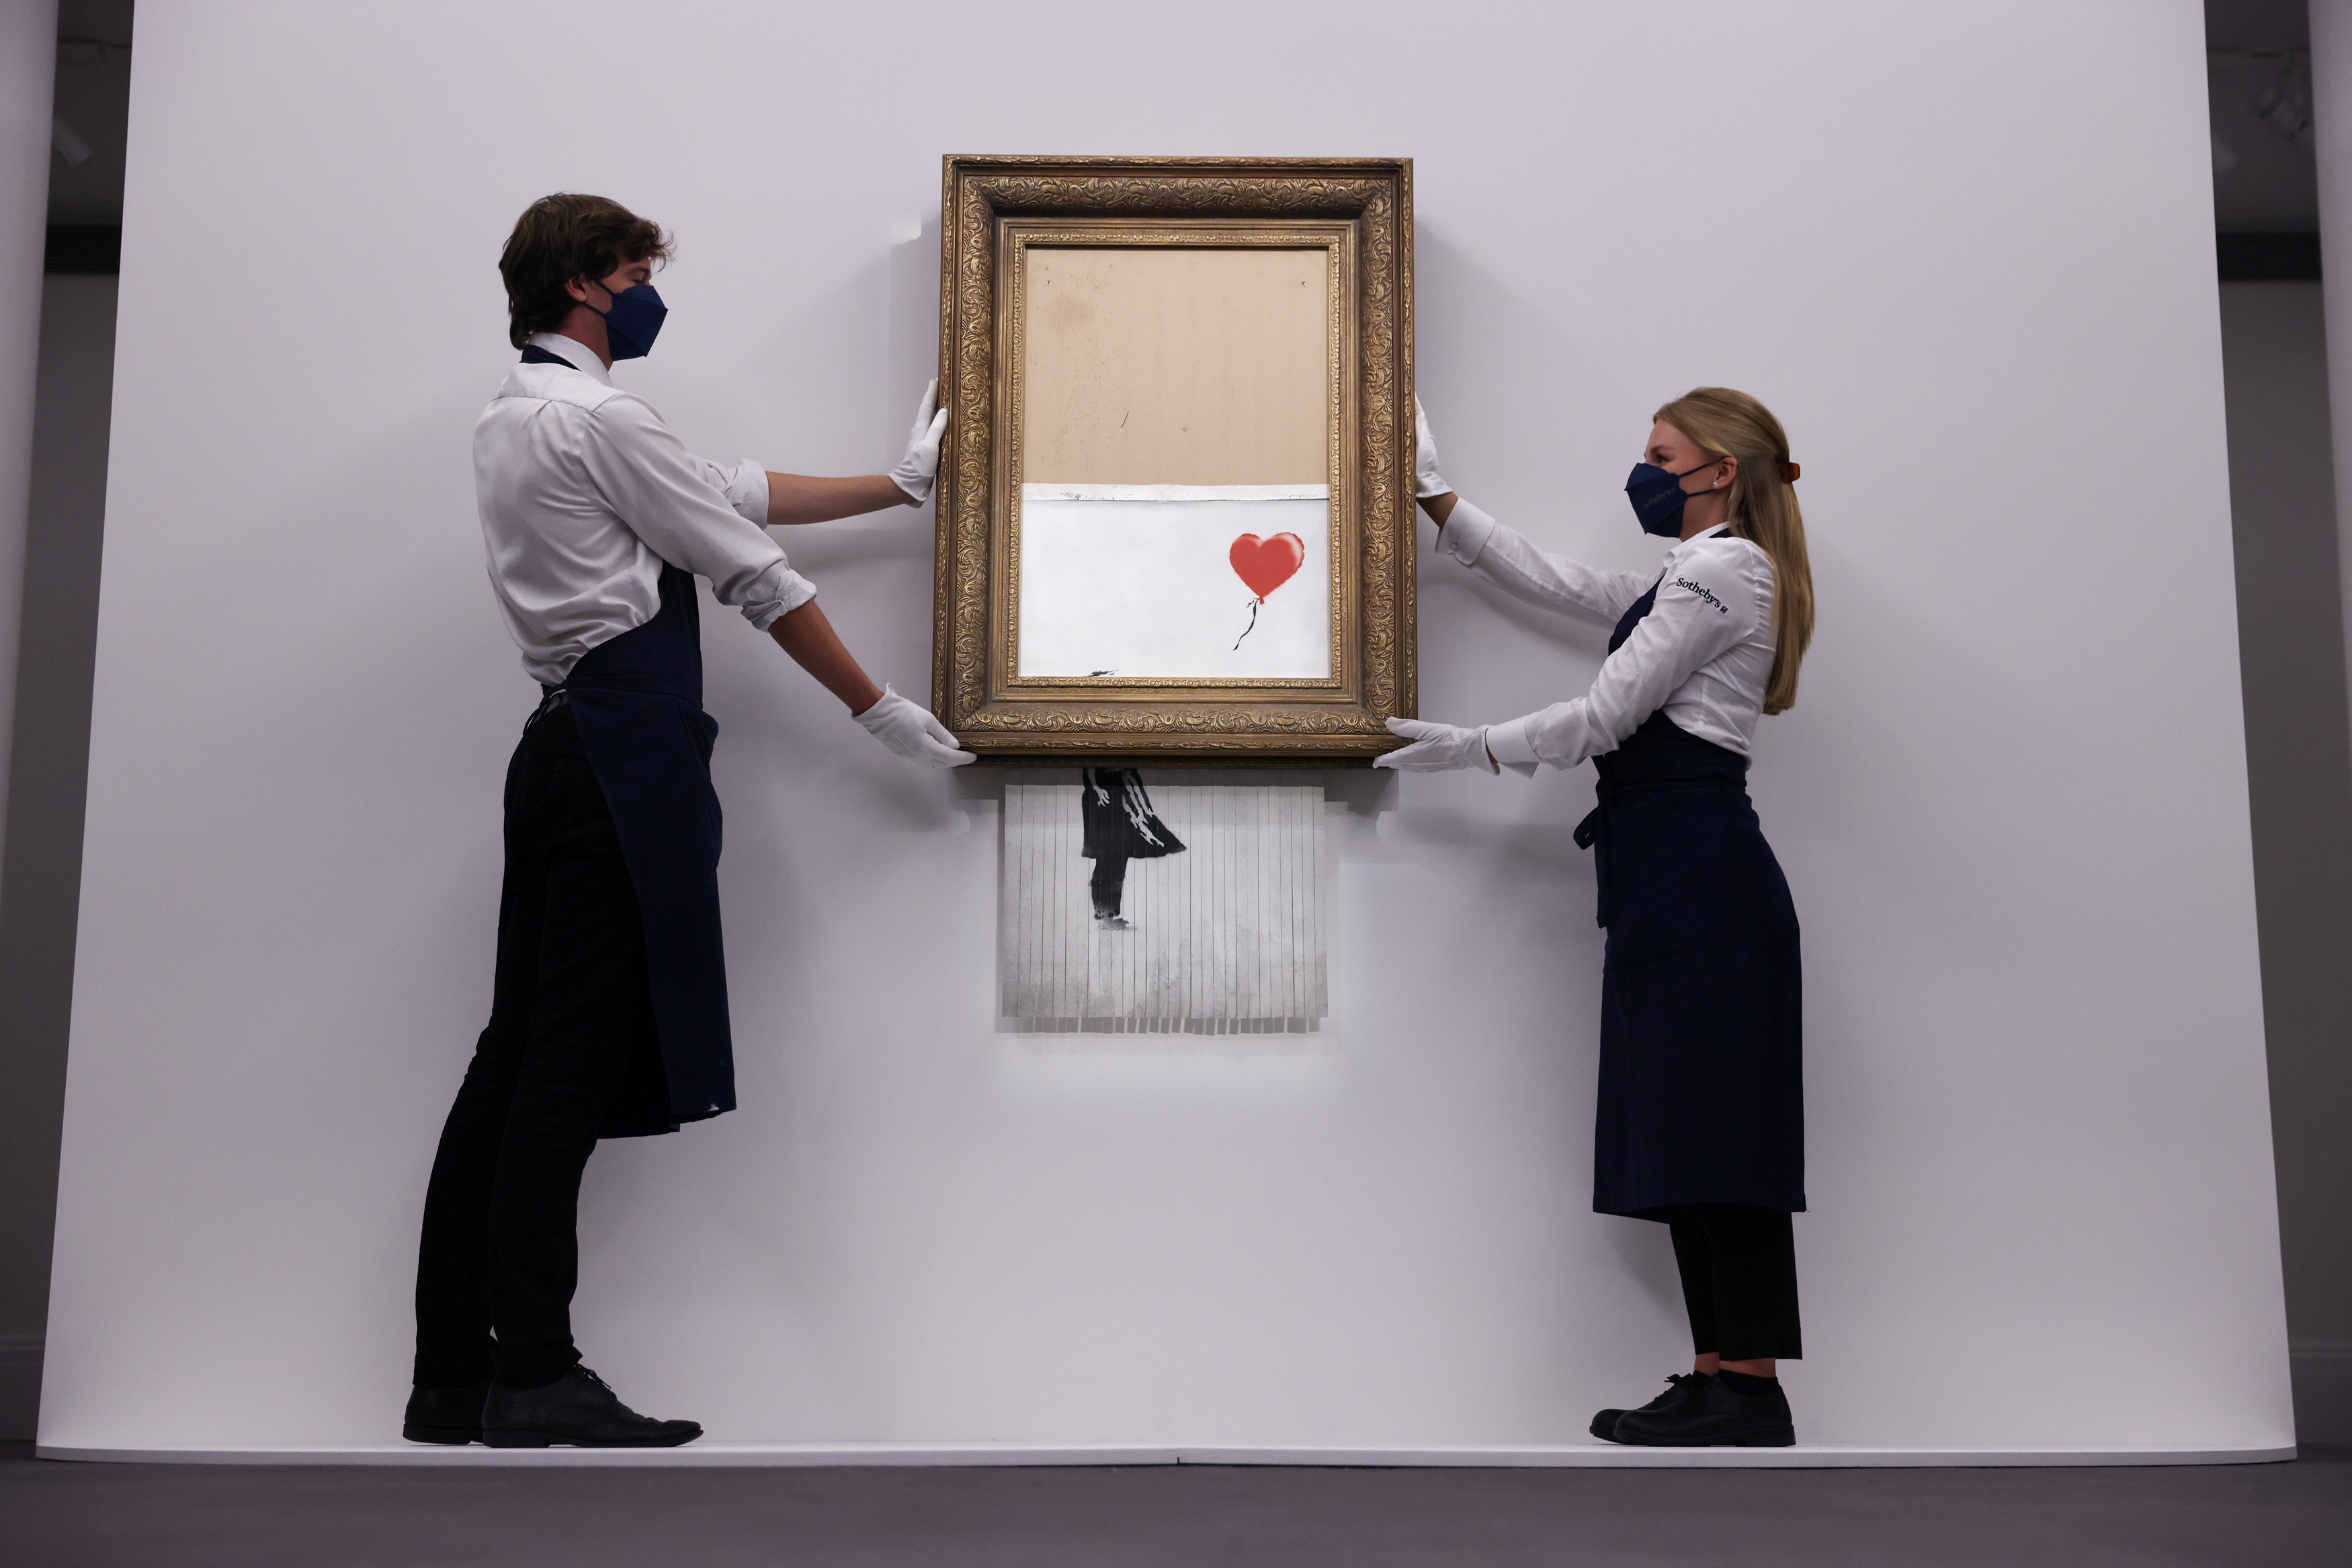 A gallery assistant poses by 'Love is in the Bin', an artwork by Banksy, which will be for sale in an auction, at Sotheby's in London, Britain, September 3, 2021. REUTERS/Tom Nicholson